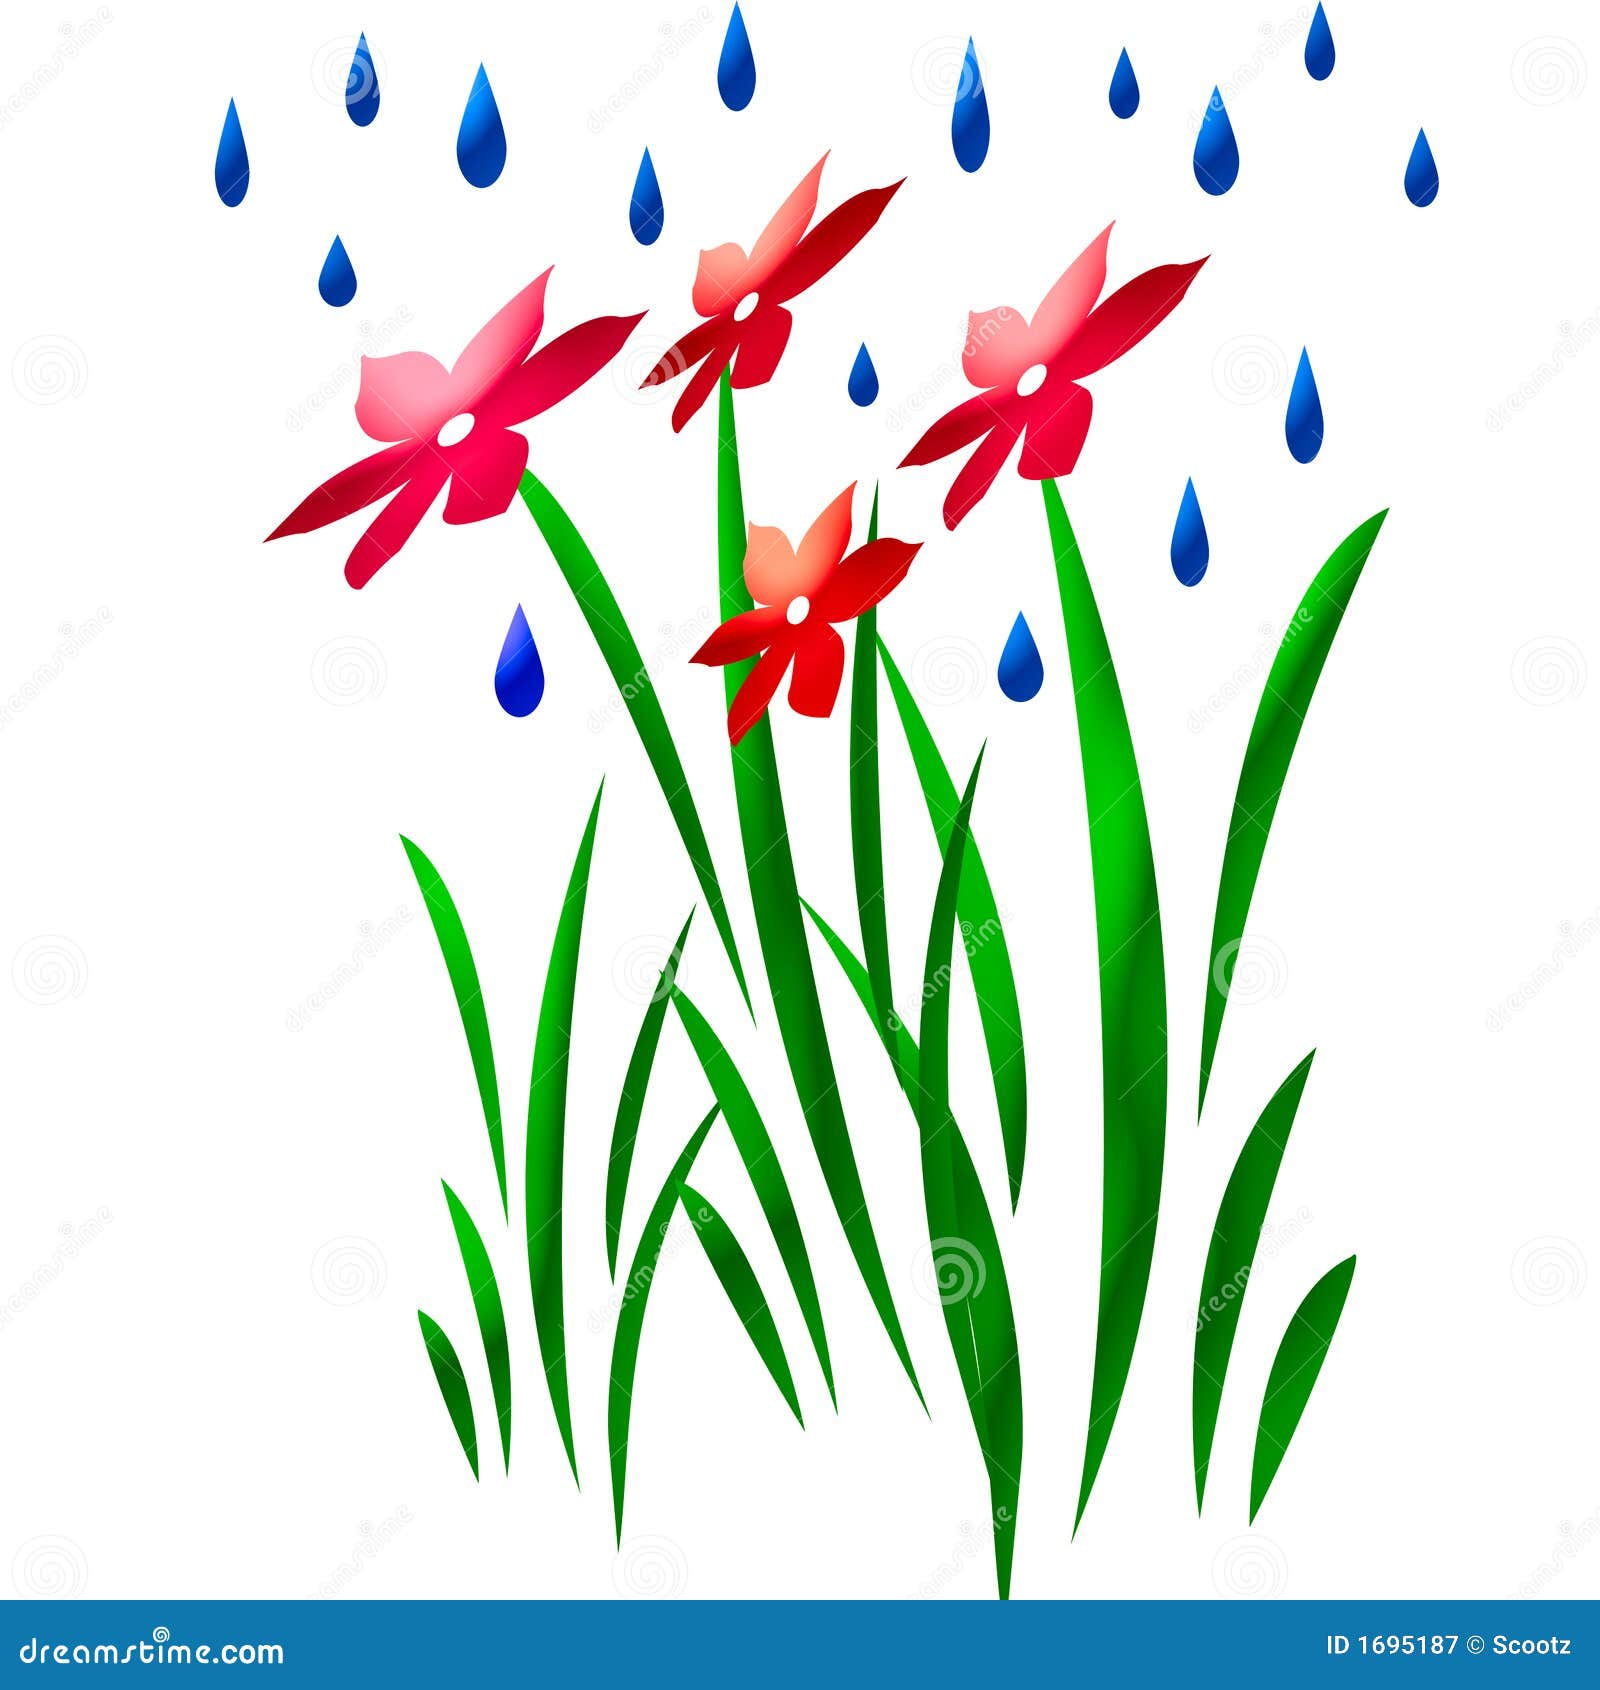 clipart spring showers - photo #42